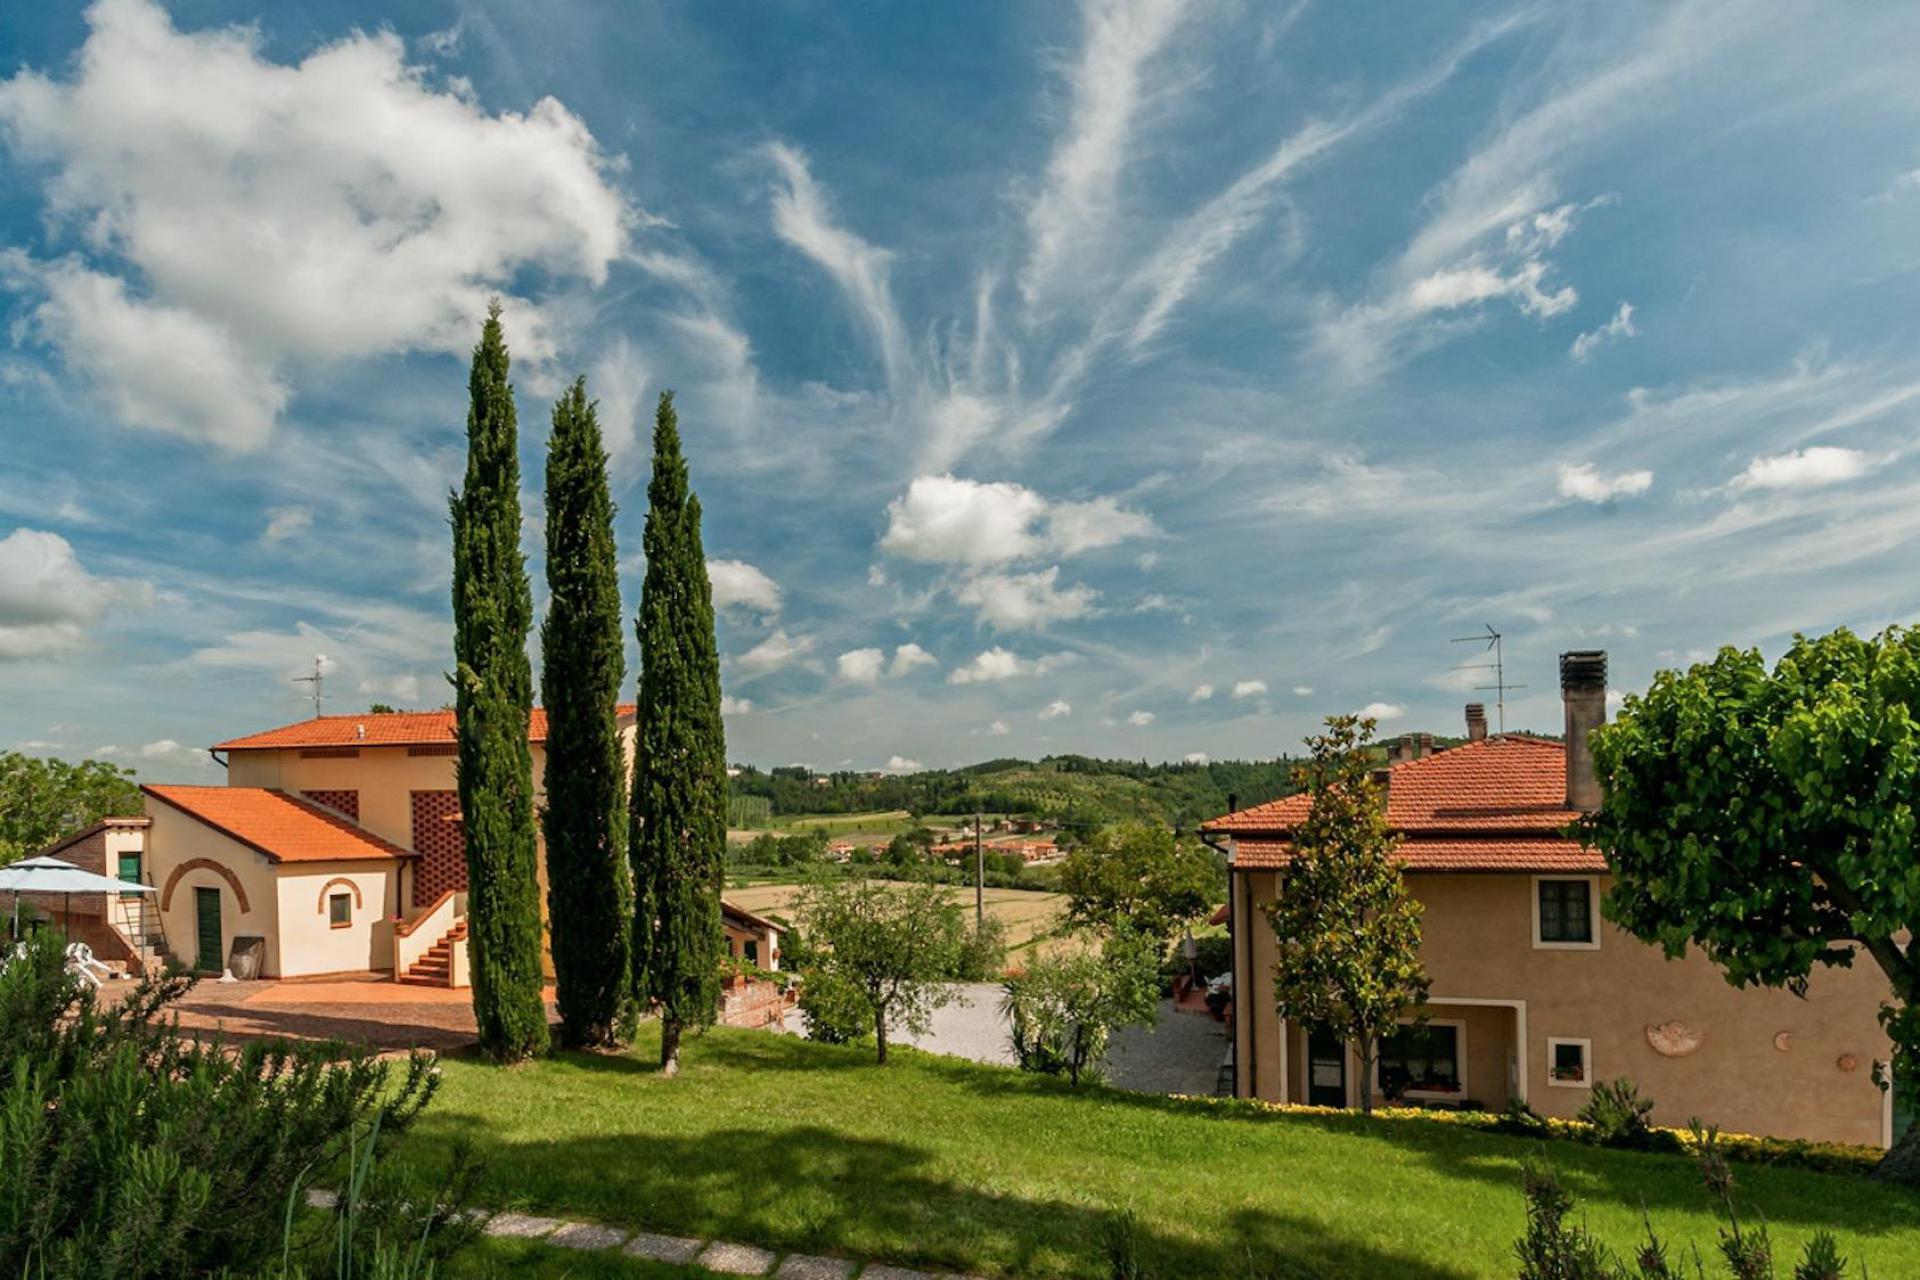 Agriturismo for families with large pool and paddling pool